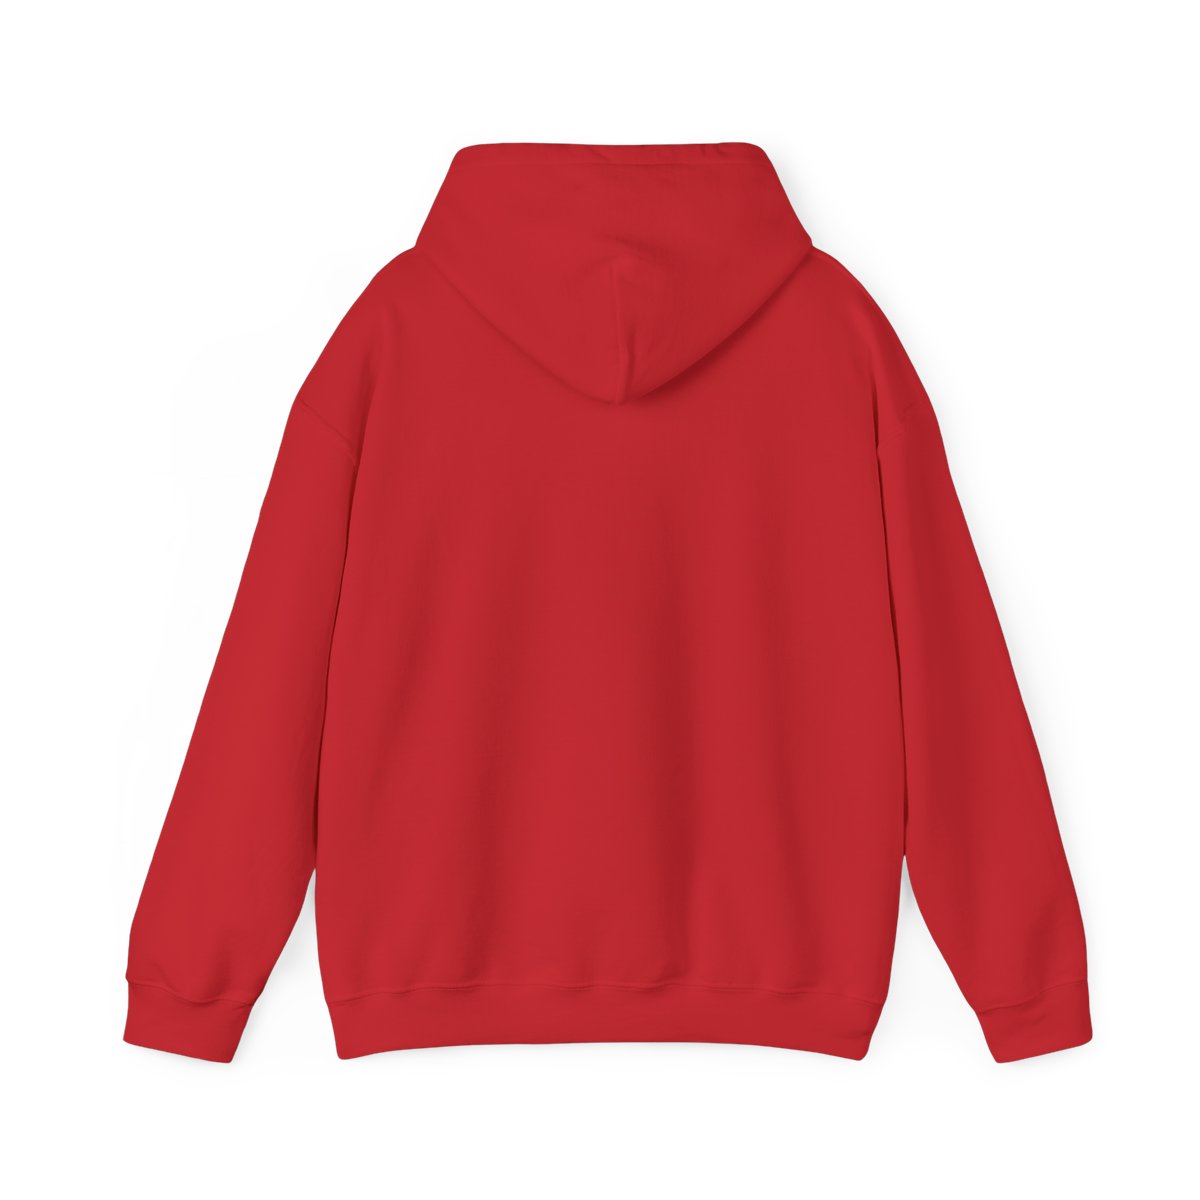 YOGA EVERY DAY Hoodie product thumbnail image